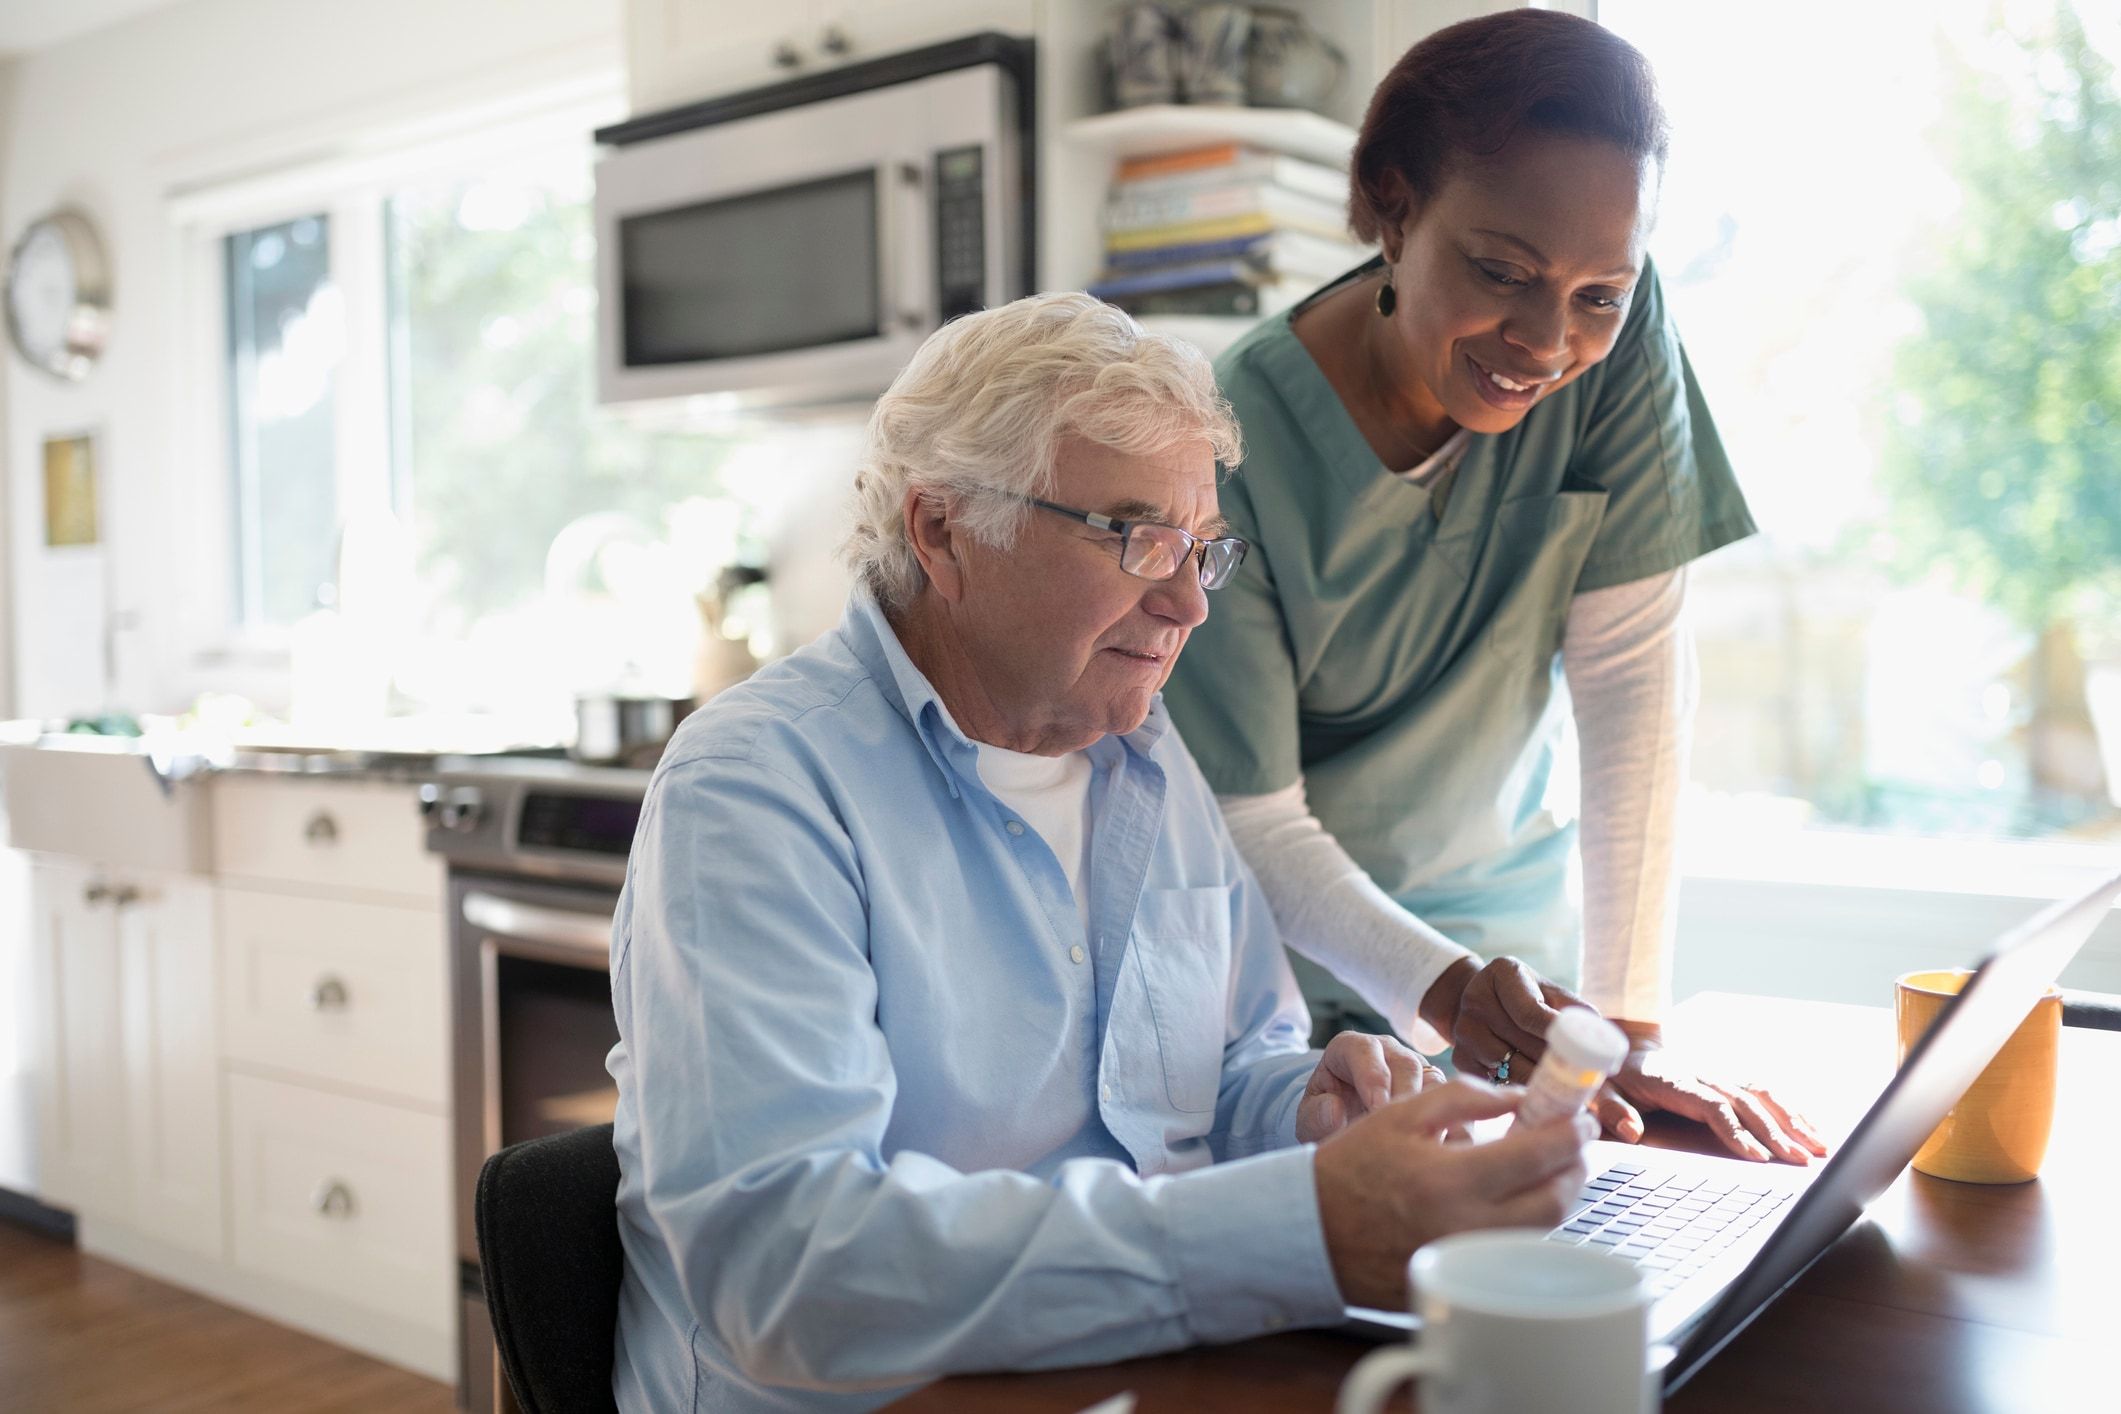 How to become a certified home health aide: Training, pay and job outlook